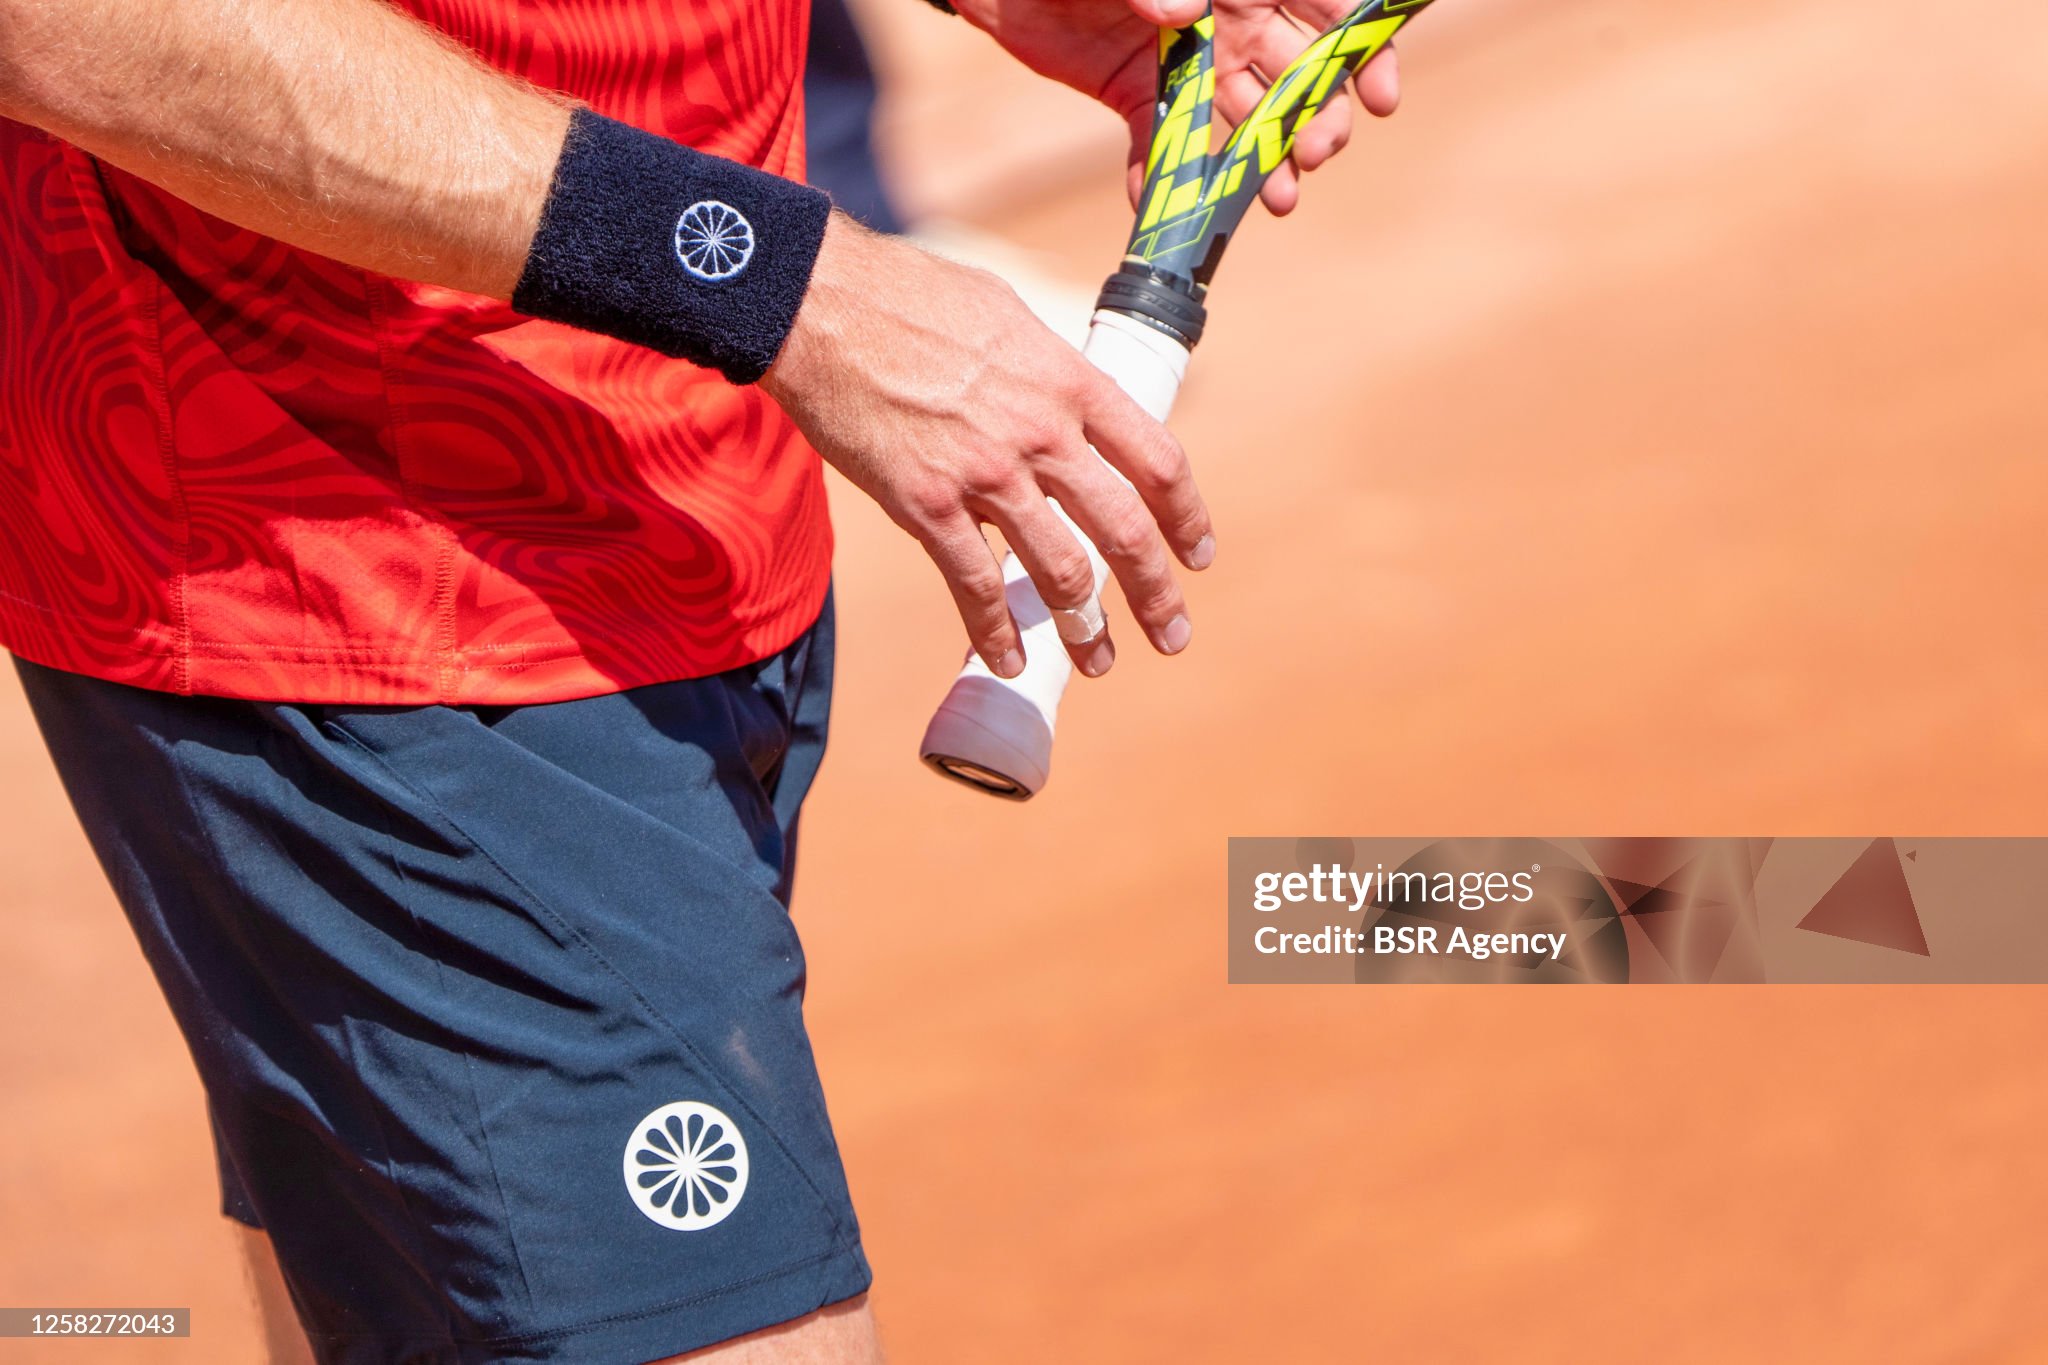 2023-french-open-day-two.jpg